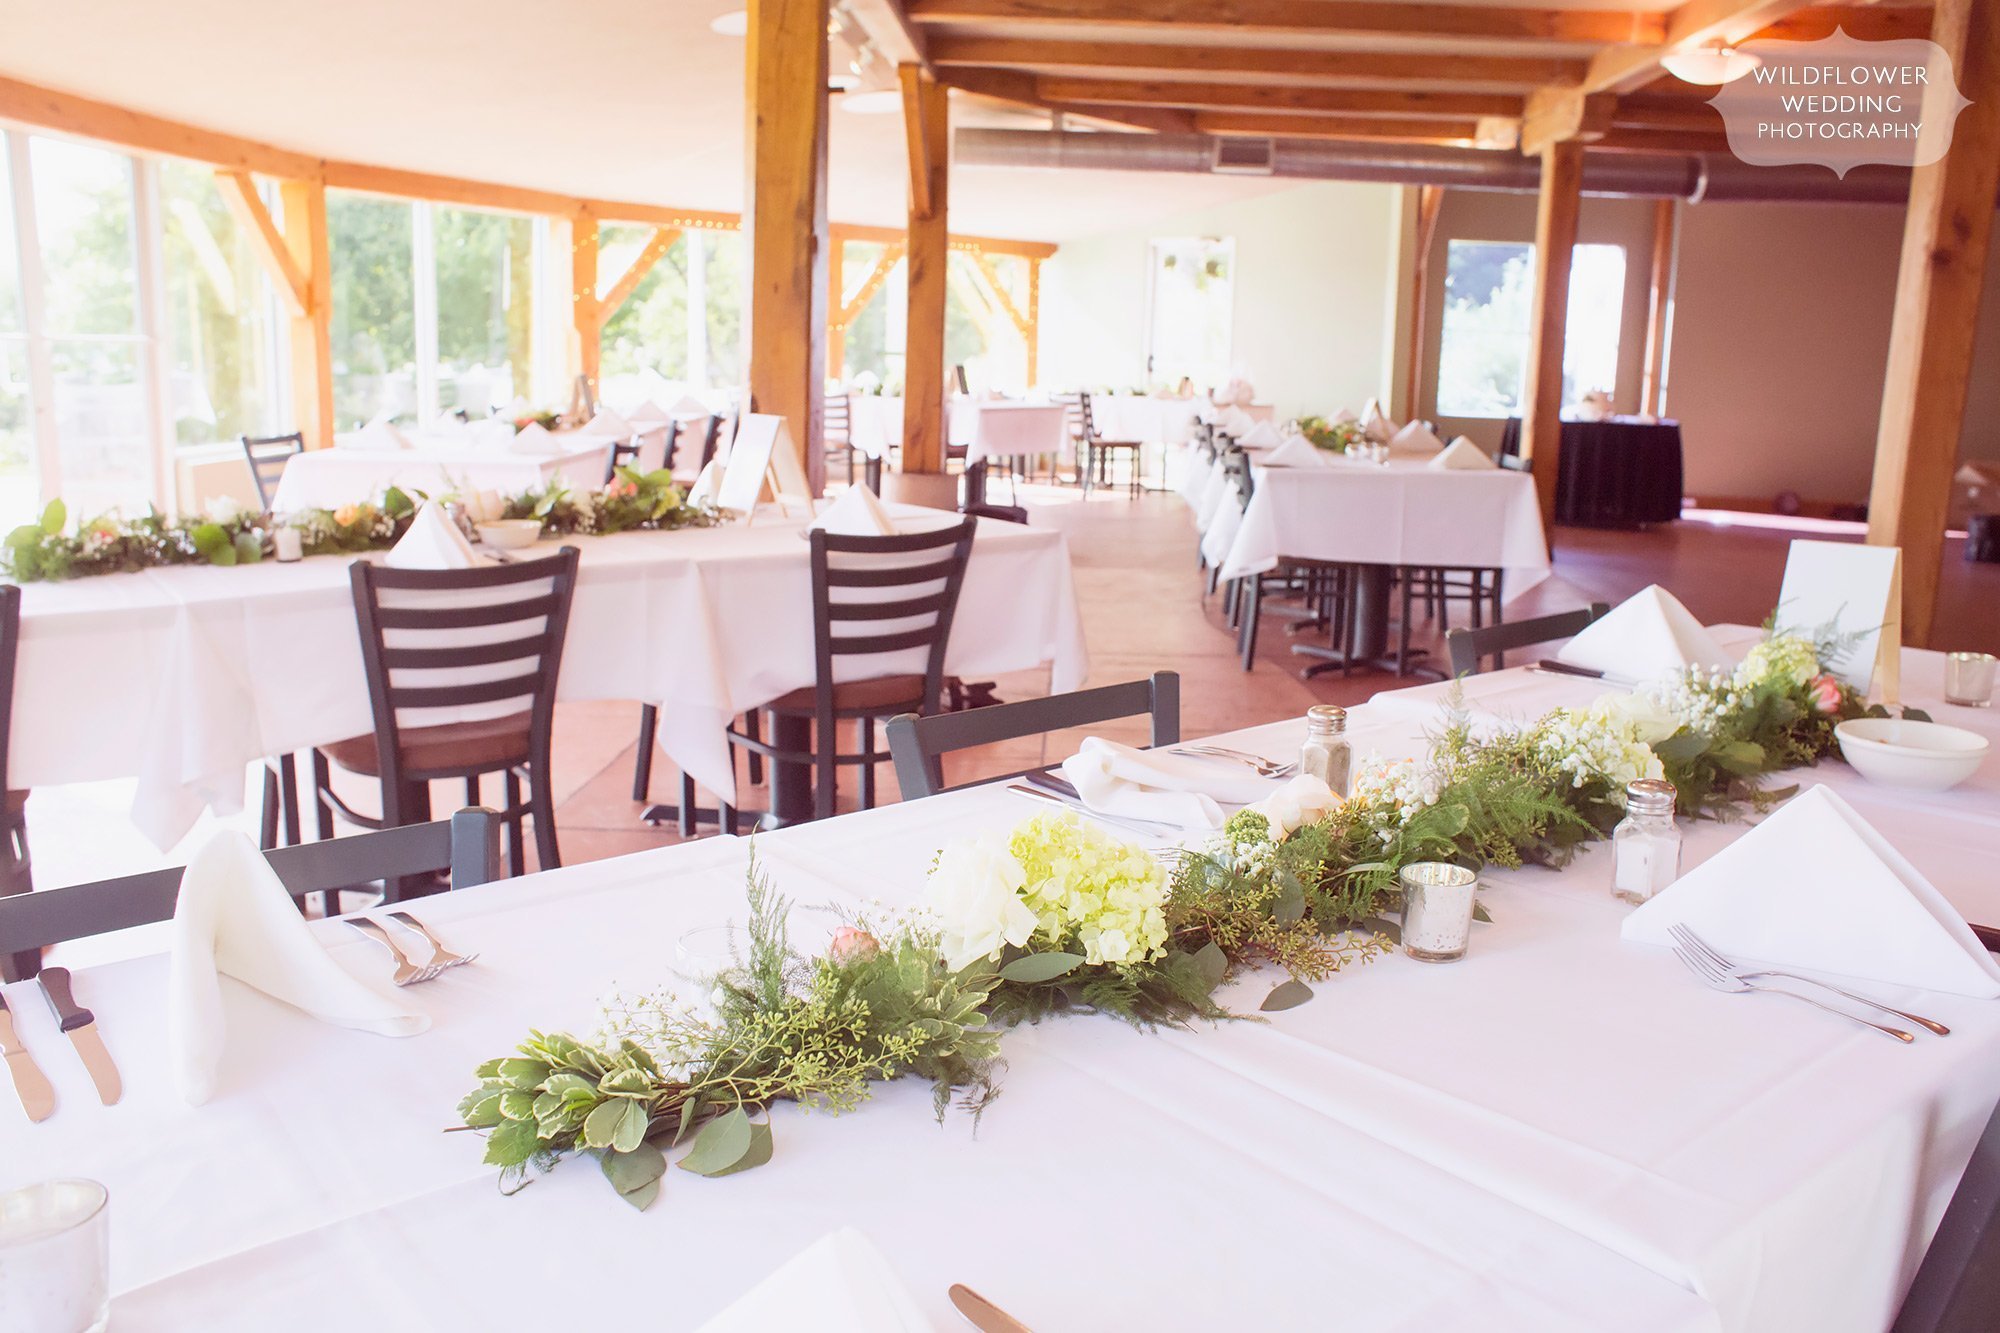 Great idea for simple table runners of greenery garlands at Les Bourgeois in Rocheport, MO.